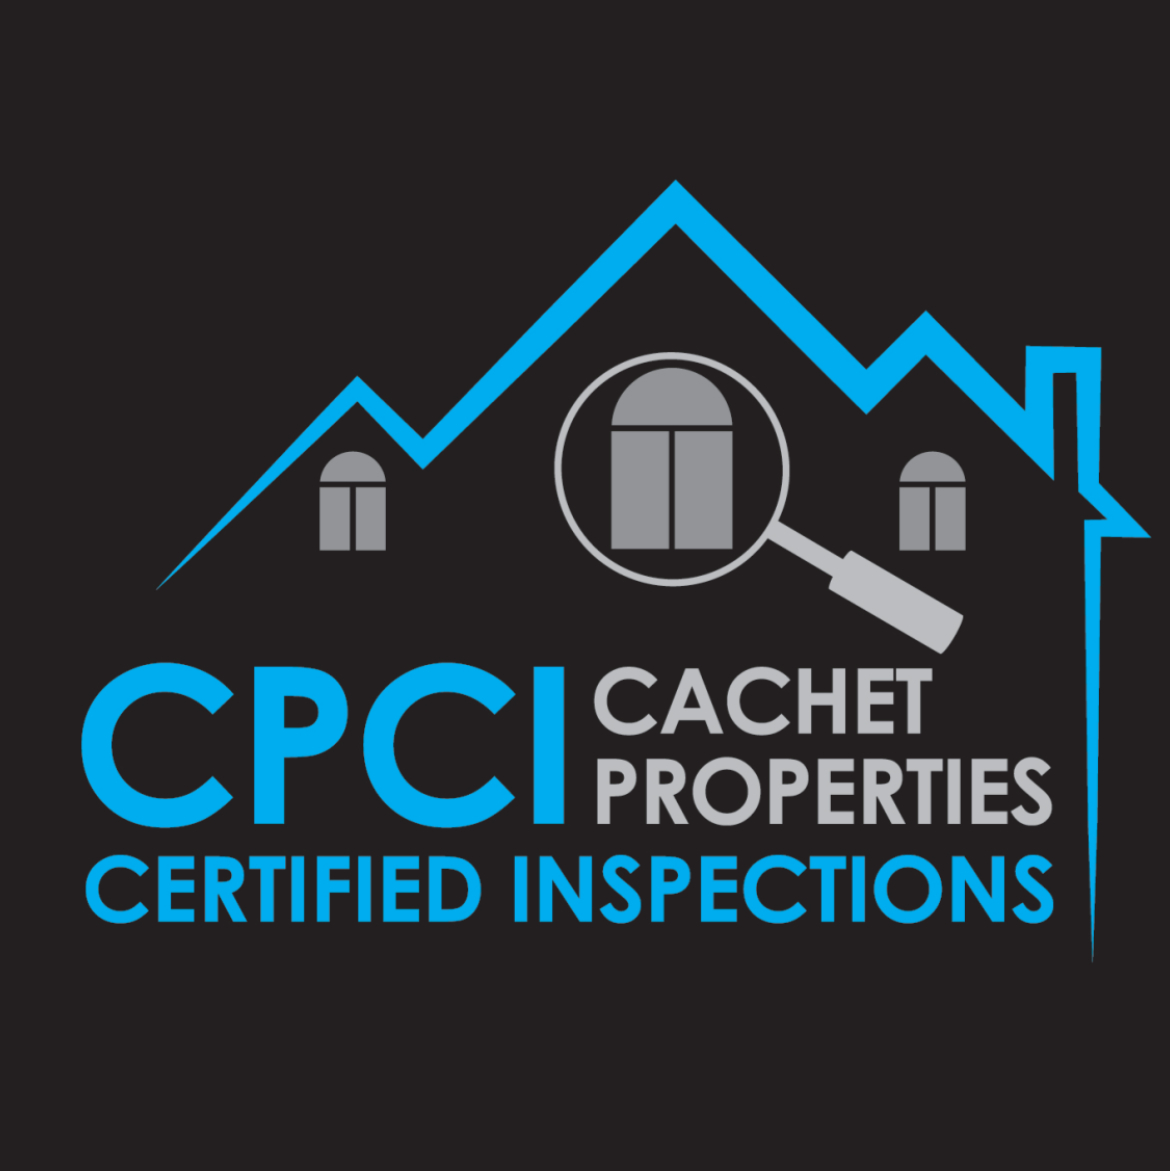 Cachet Properties Certified Inspections - Home Inspection